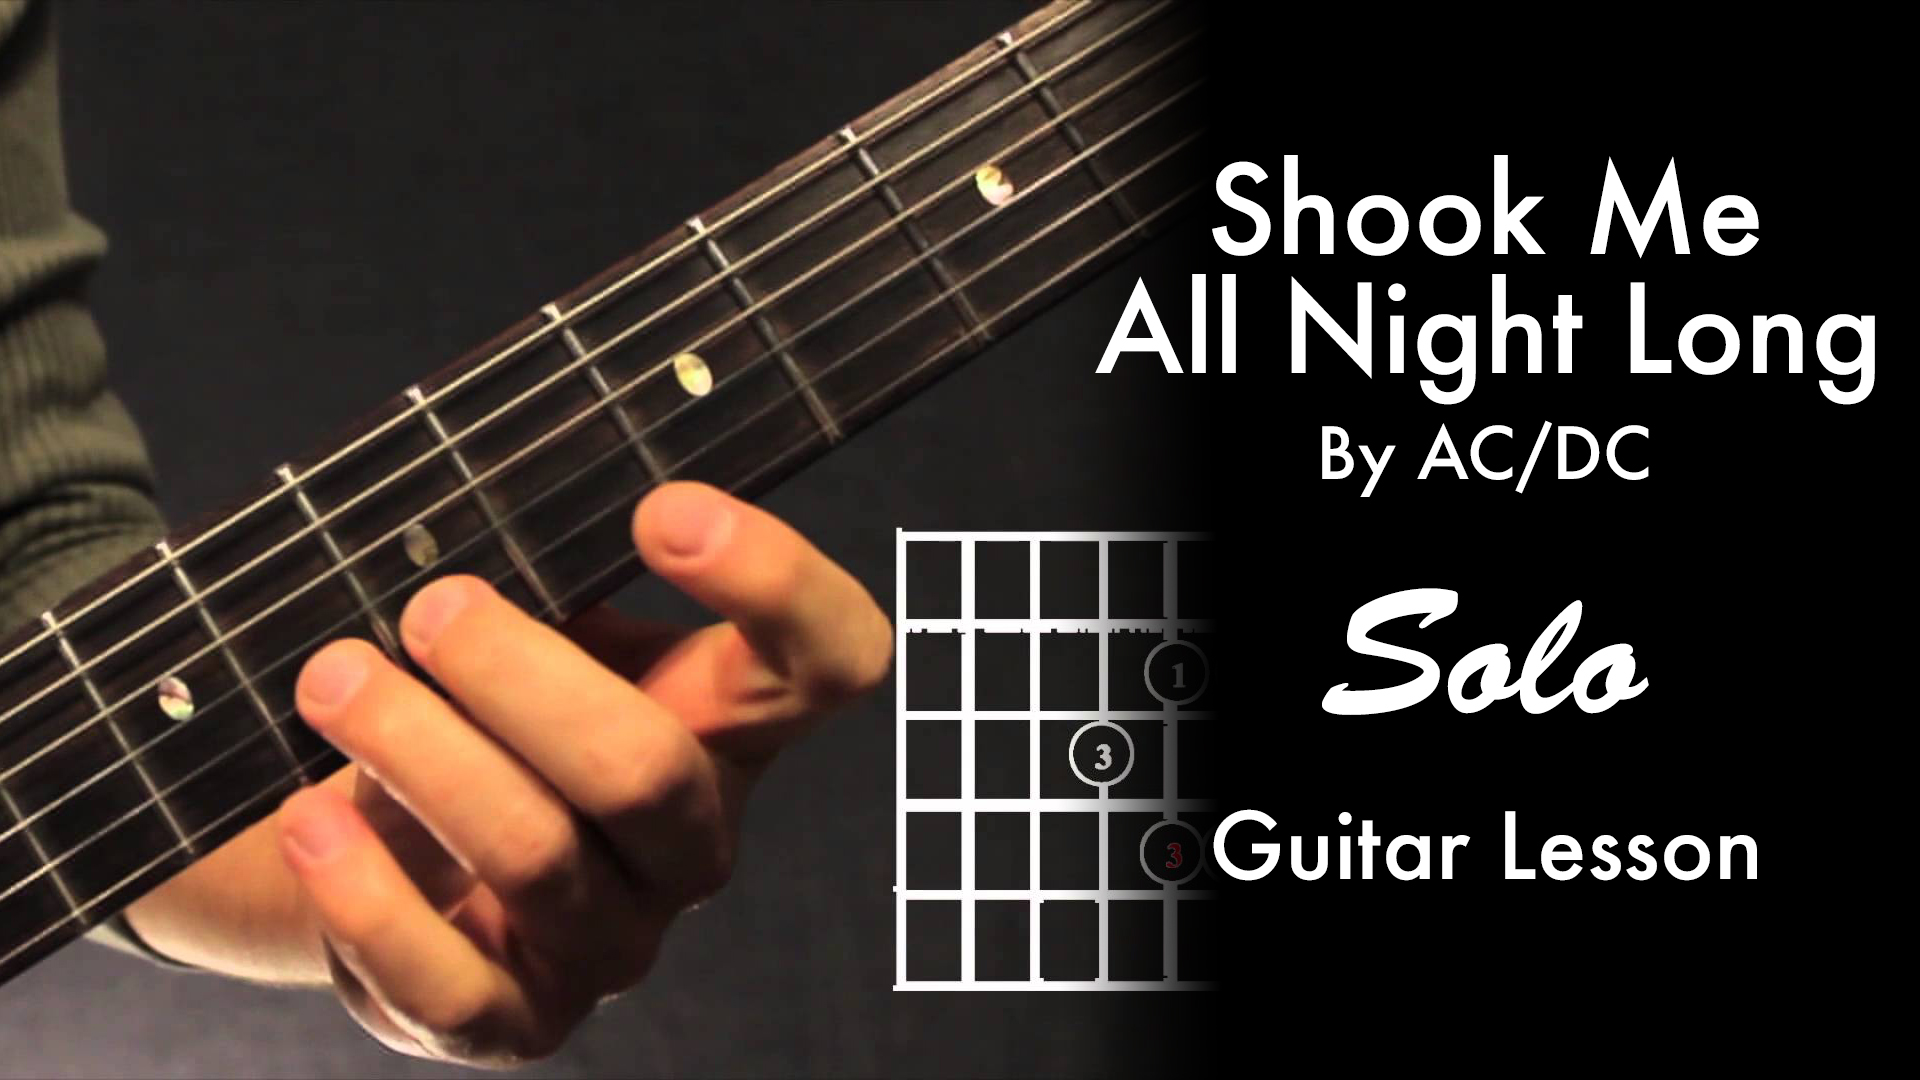 Shook Me All Night Long Solo * Garret's Guitar Lessons.